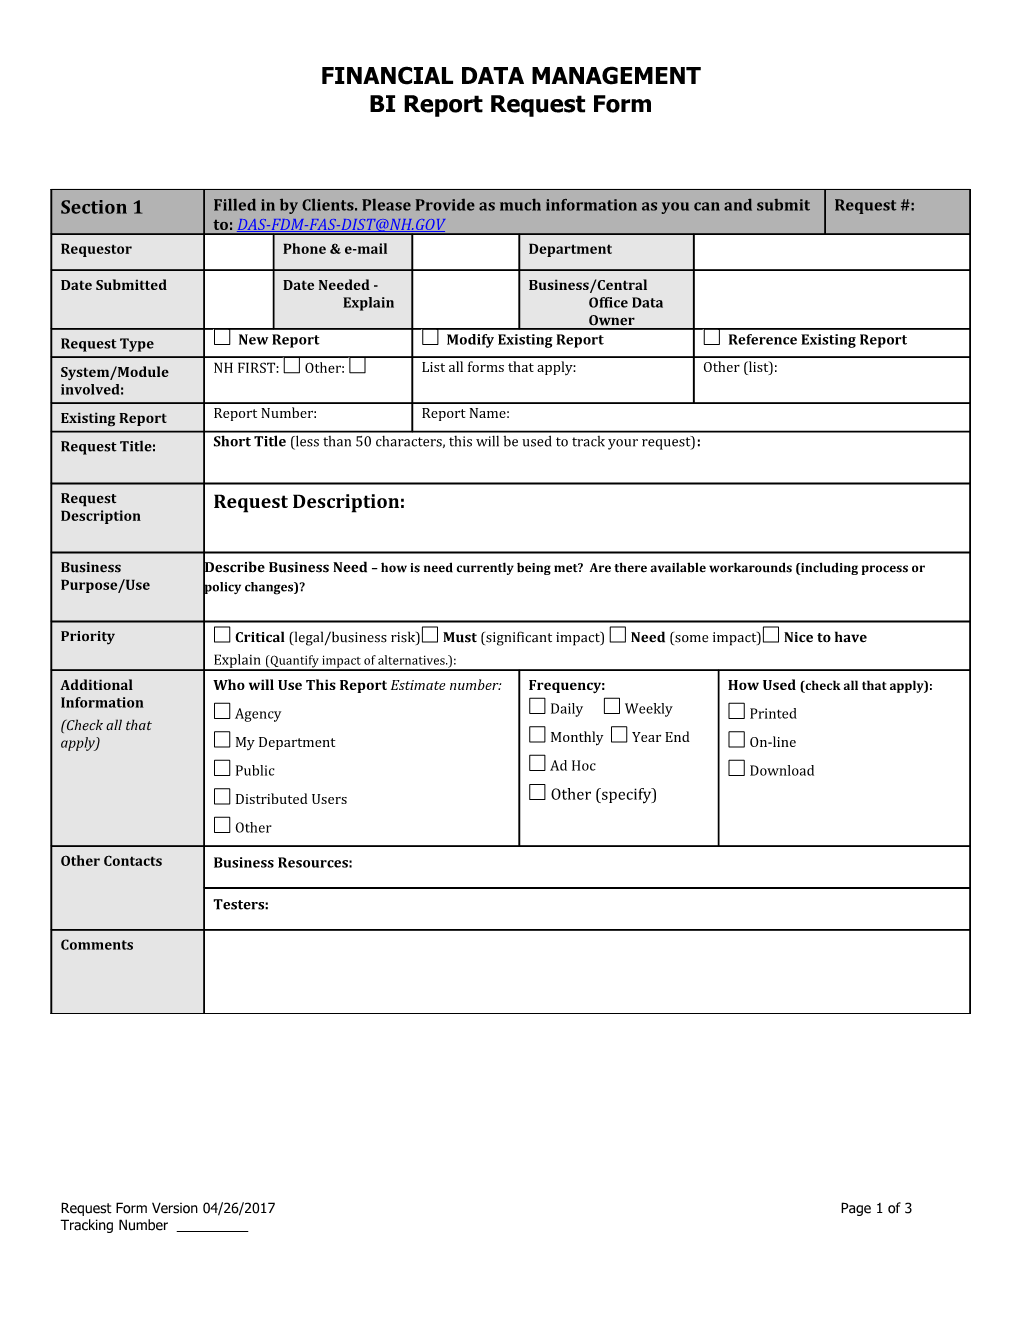 ASMG Request Form